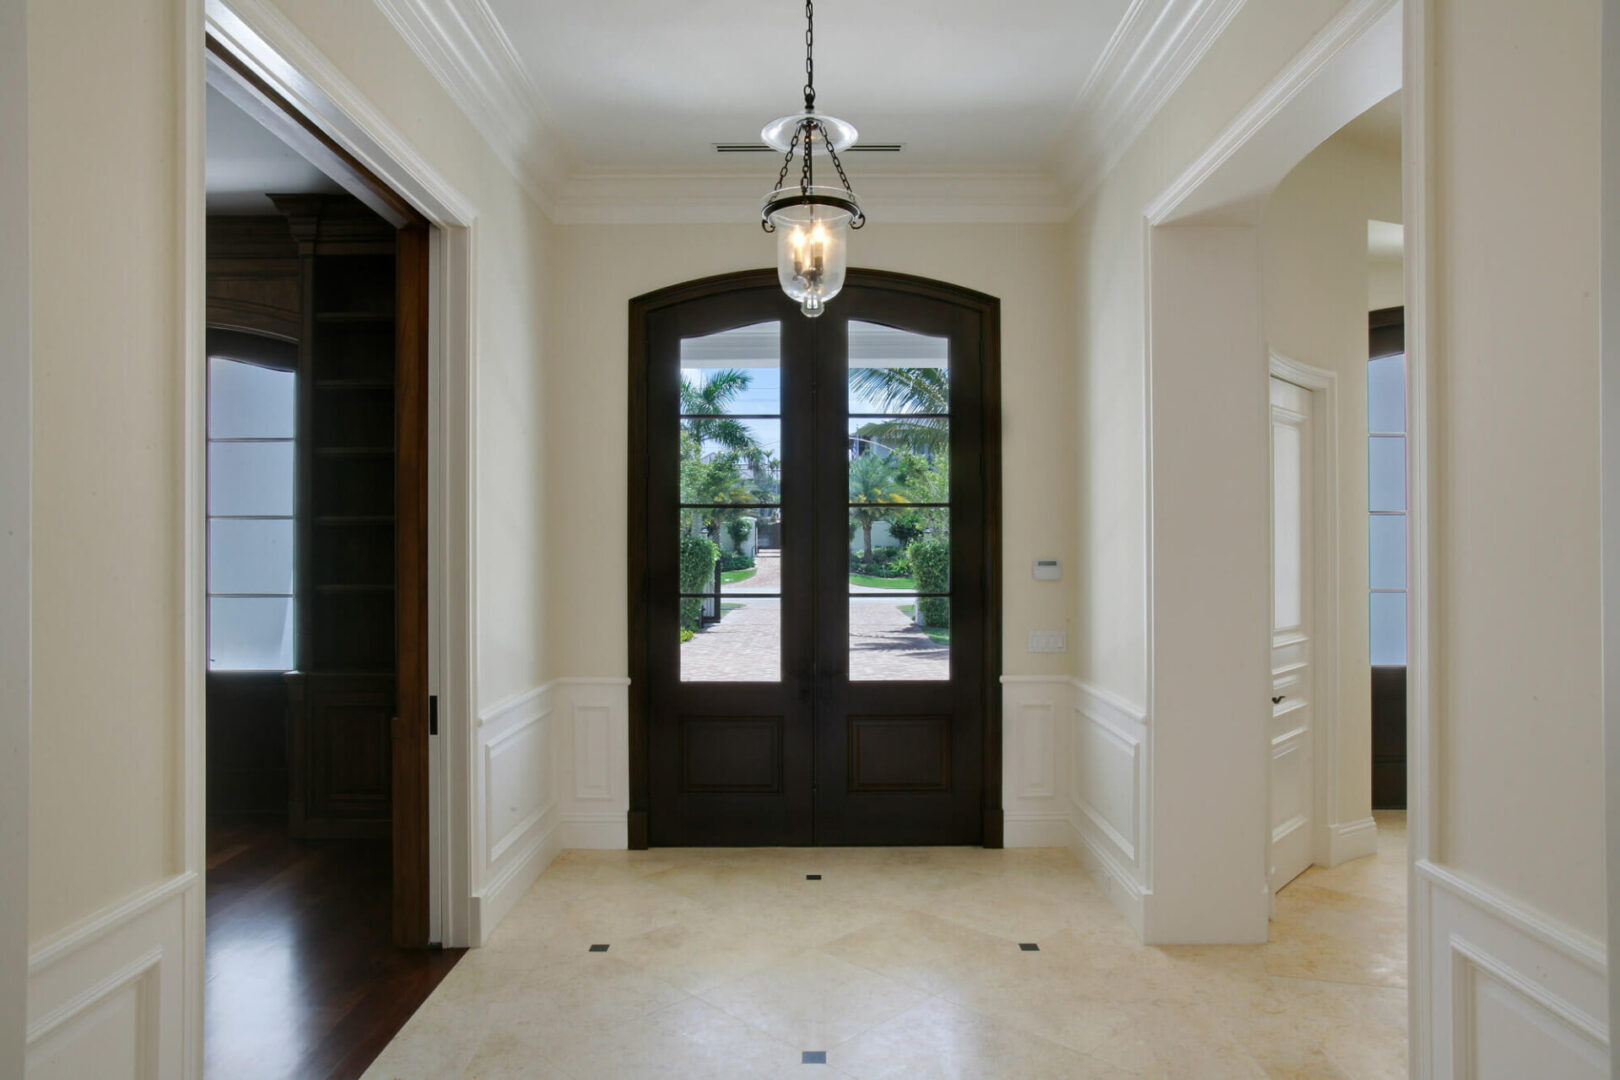 A large entry way with two doors and a light fixture.